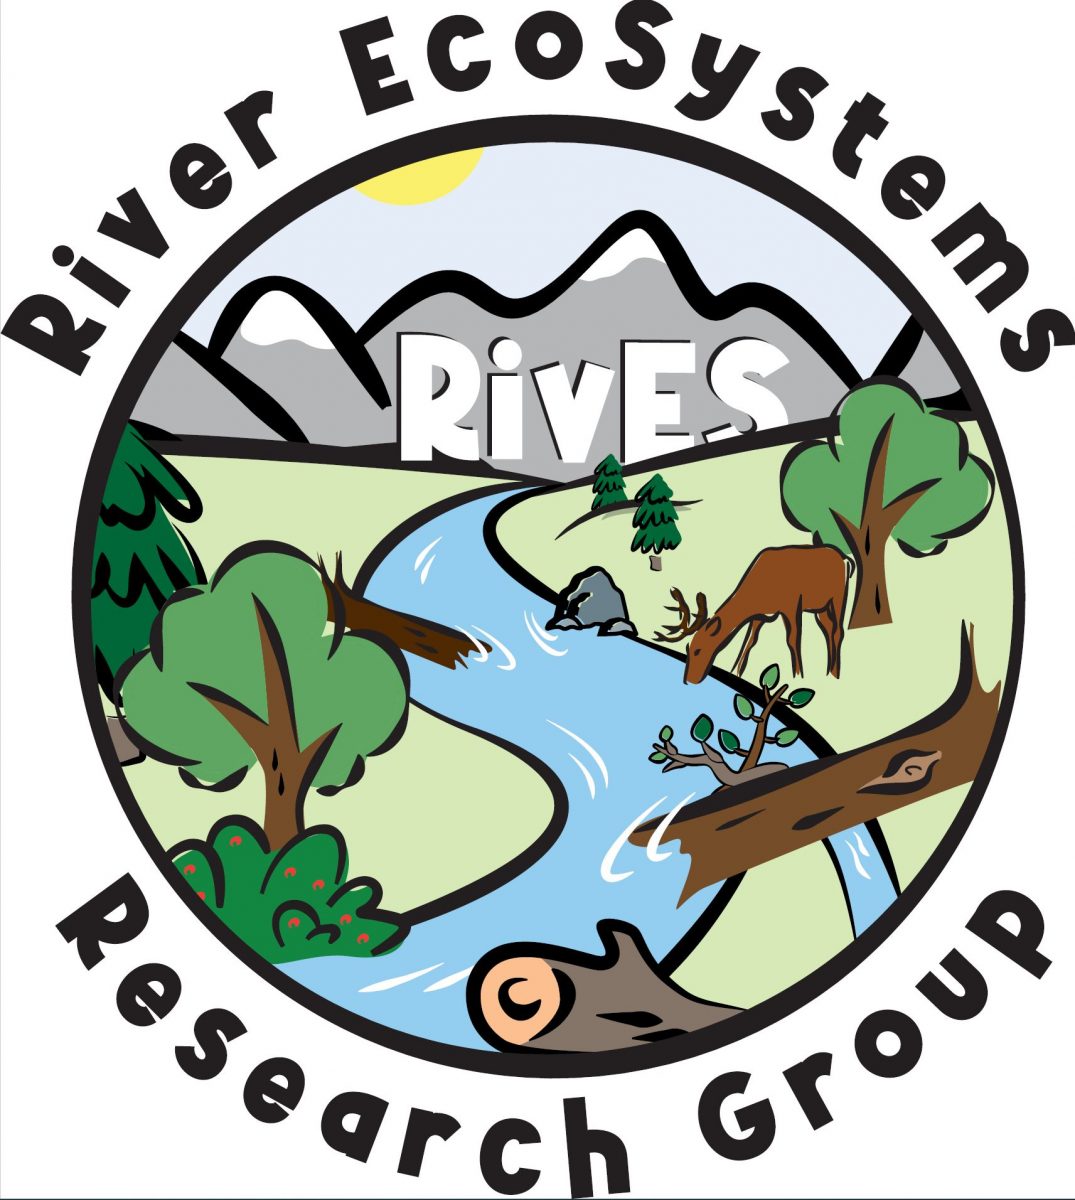 River EcoSystems Research Group (RivES)